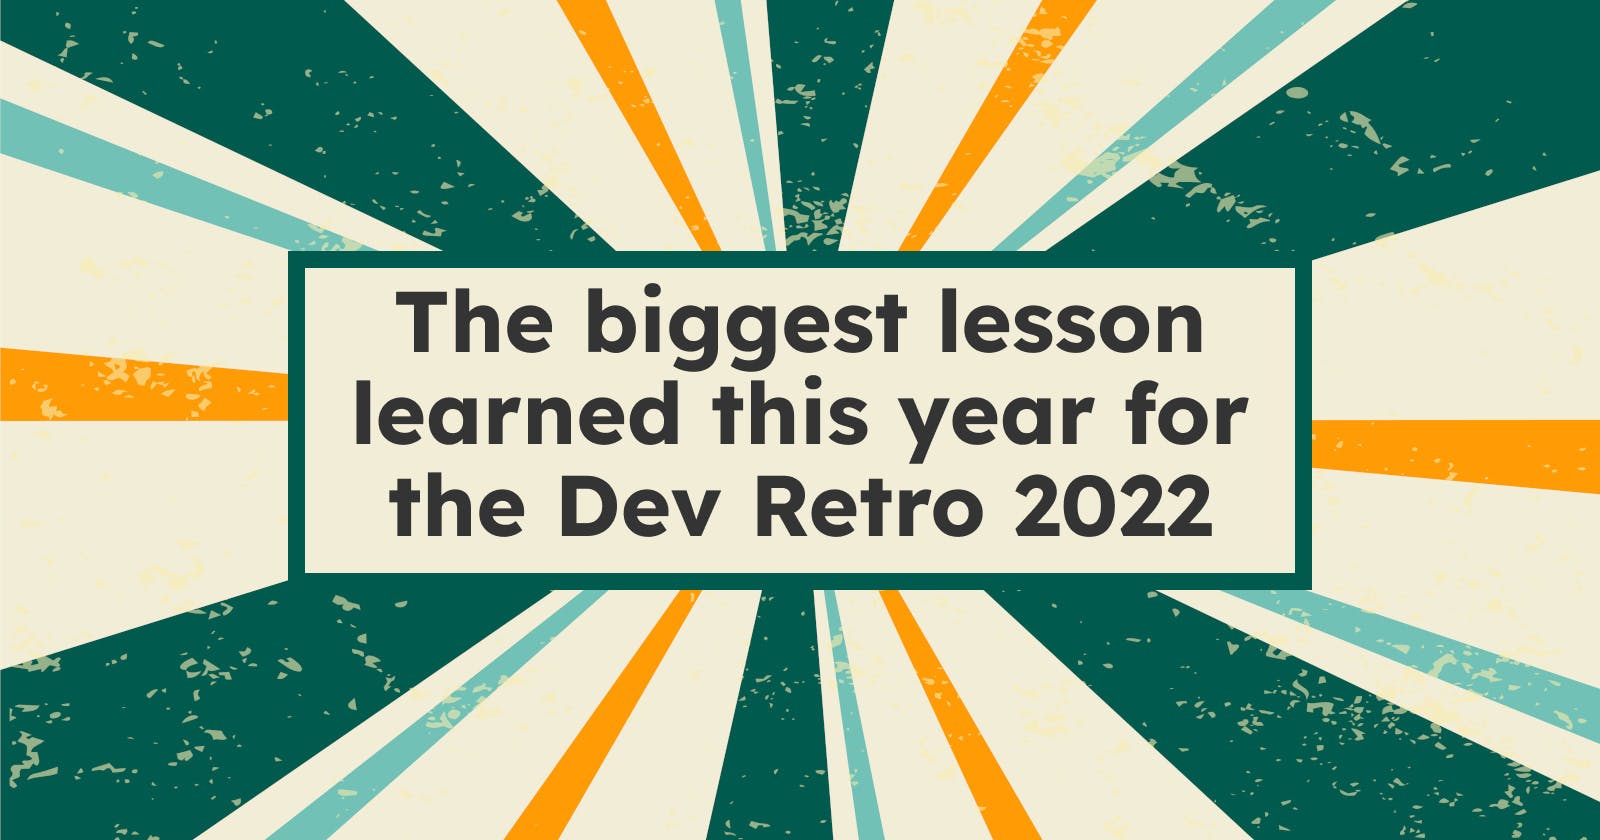 The biggest lesson learned this year for the Dev Retro 2022